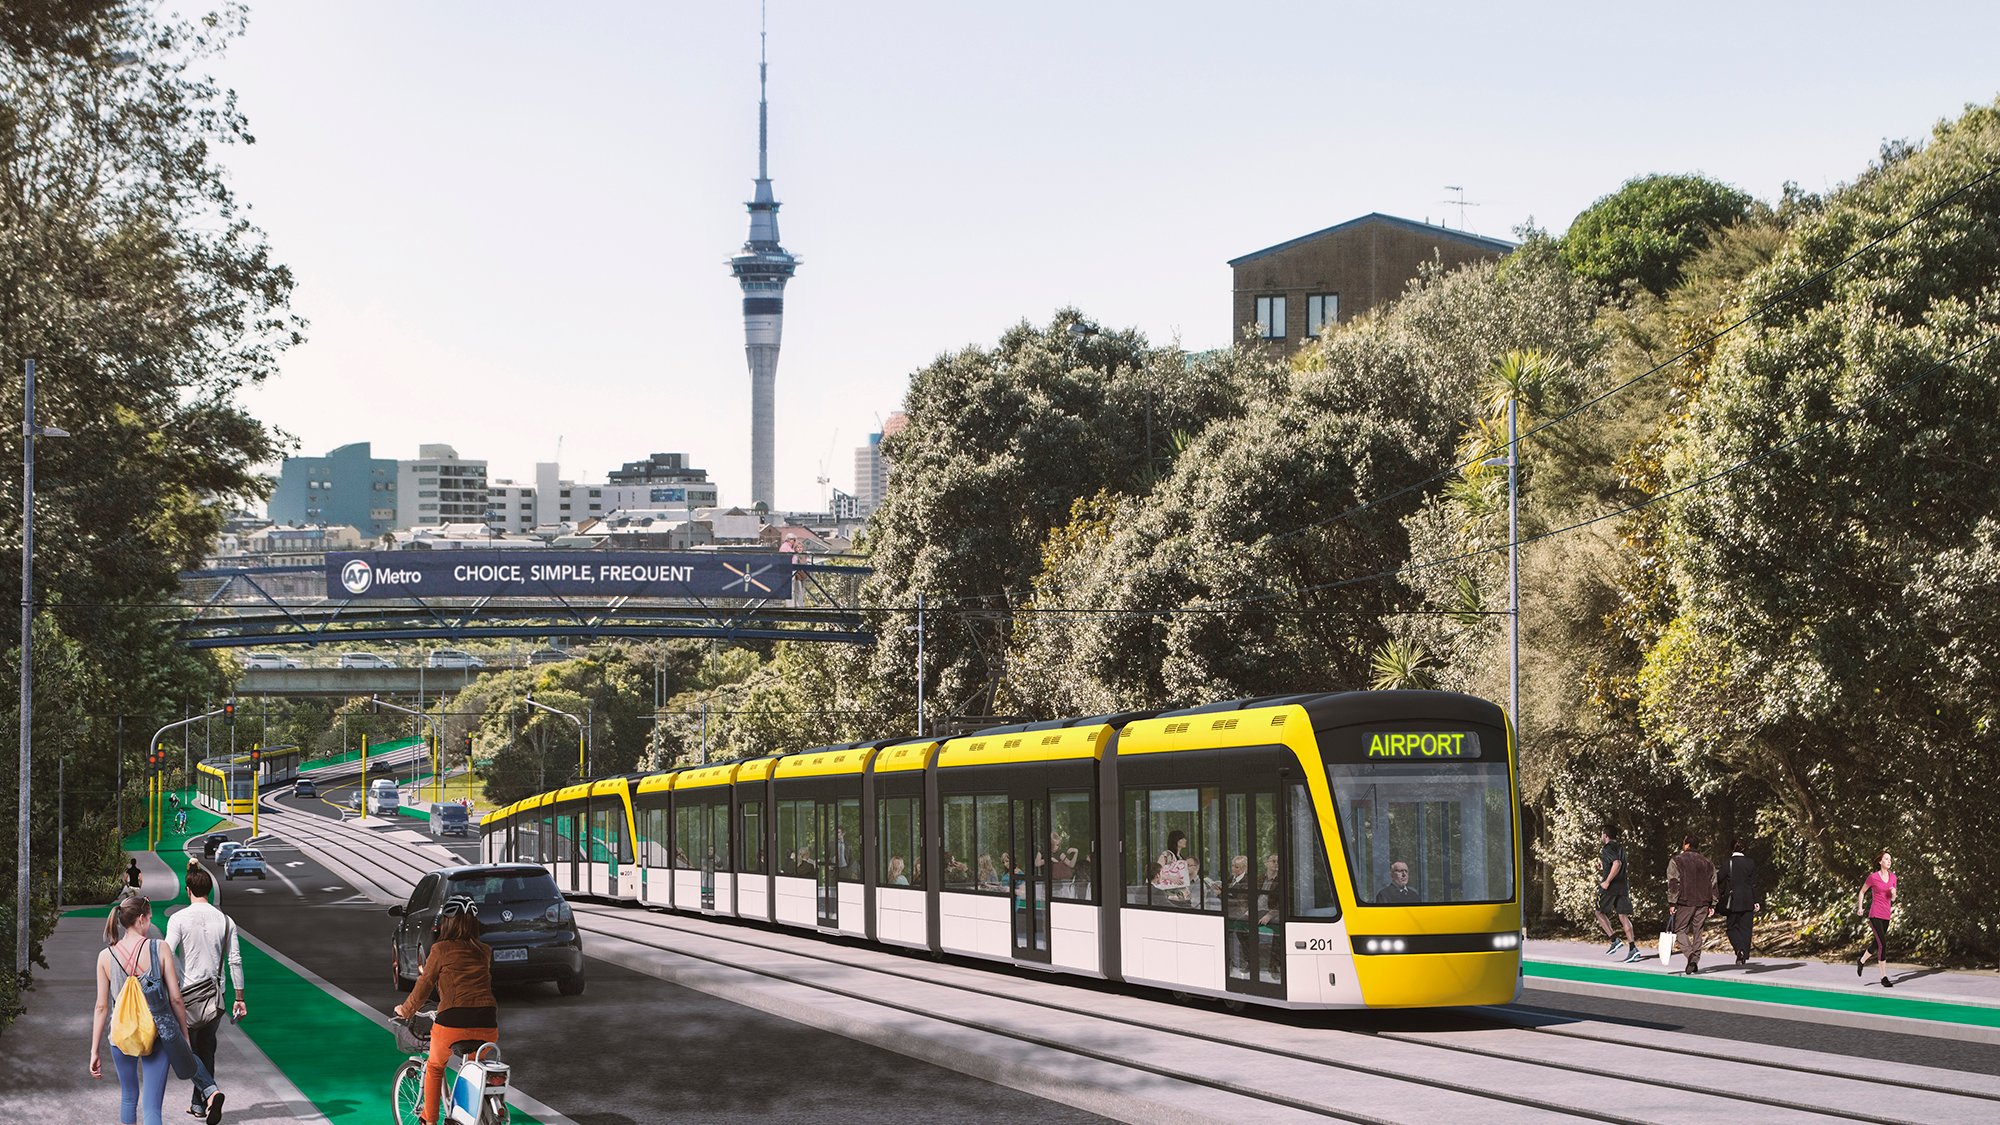 Artists impression of the proposed Auckland Light Rail operating through traffic with a view of the city in the background